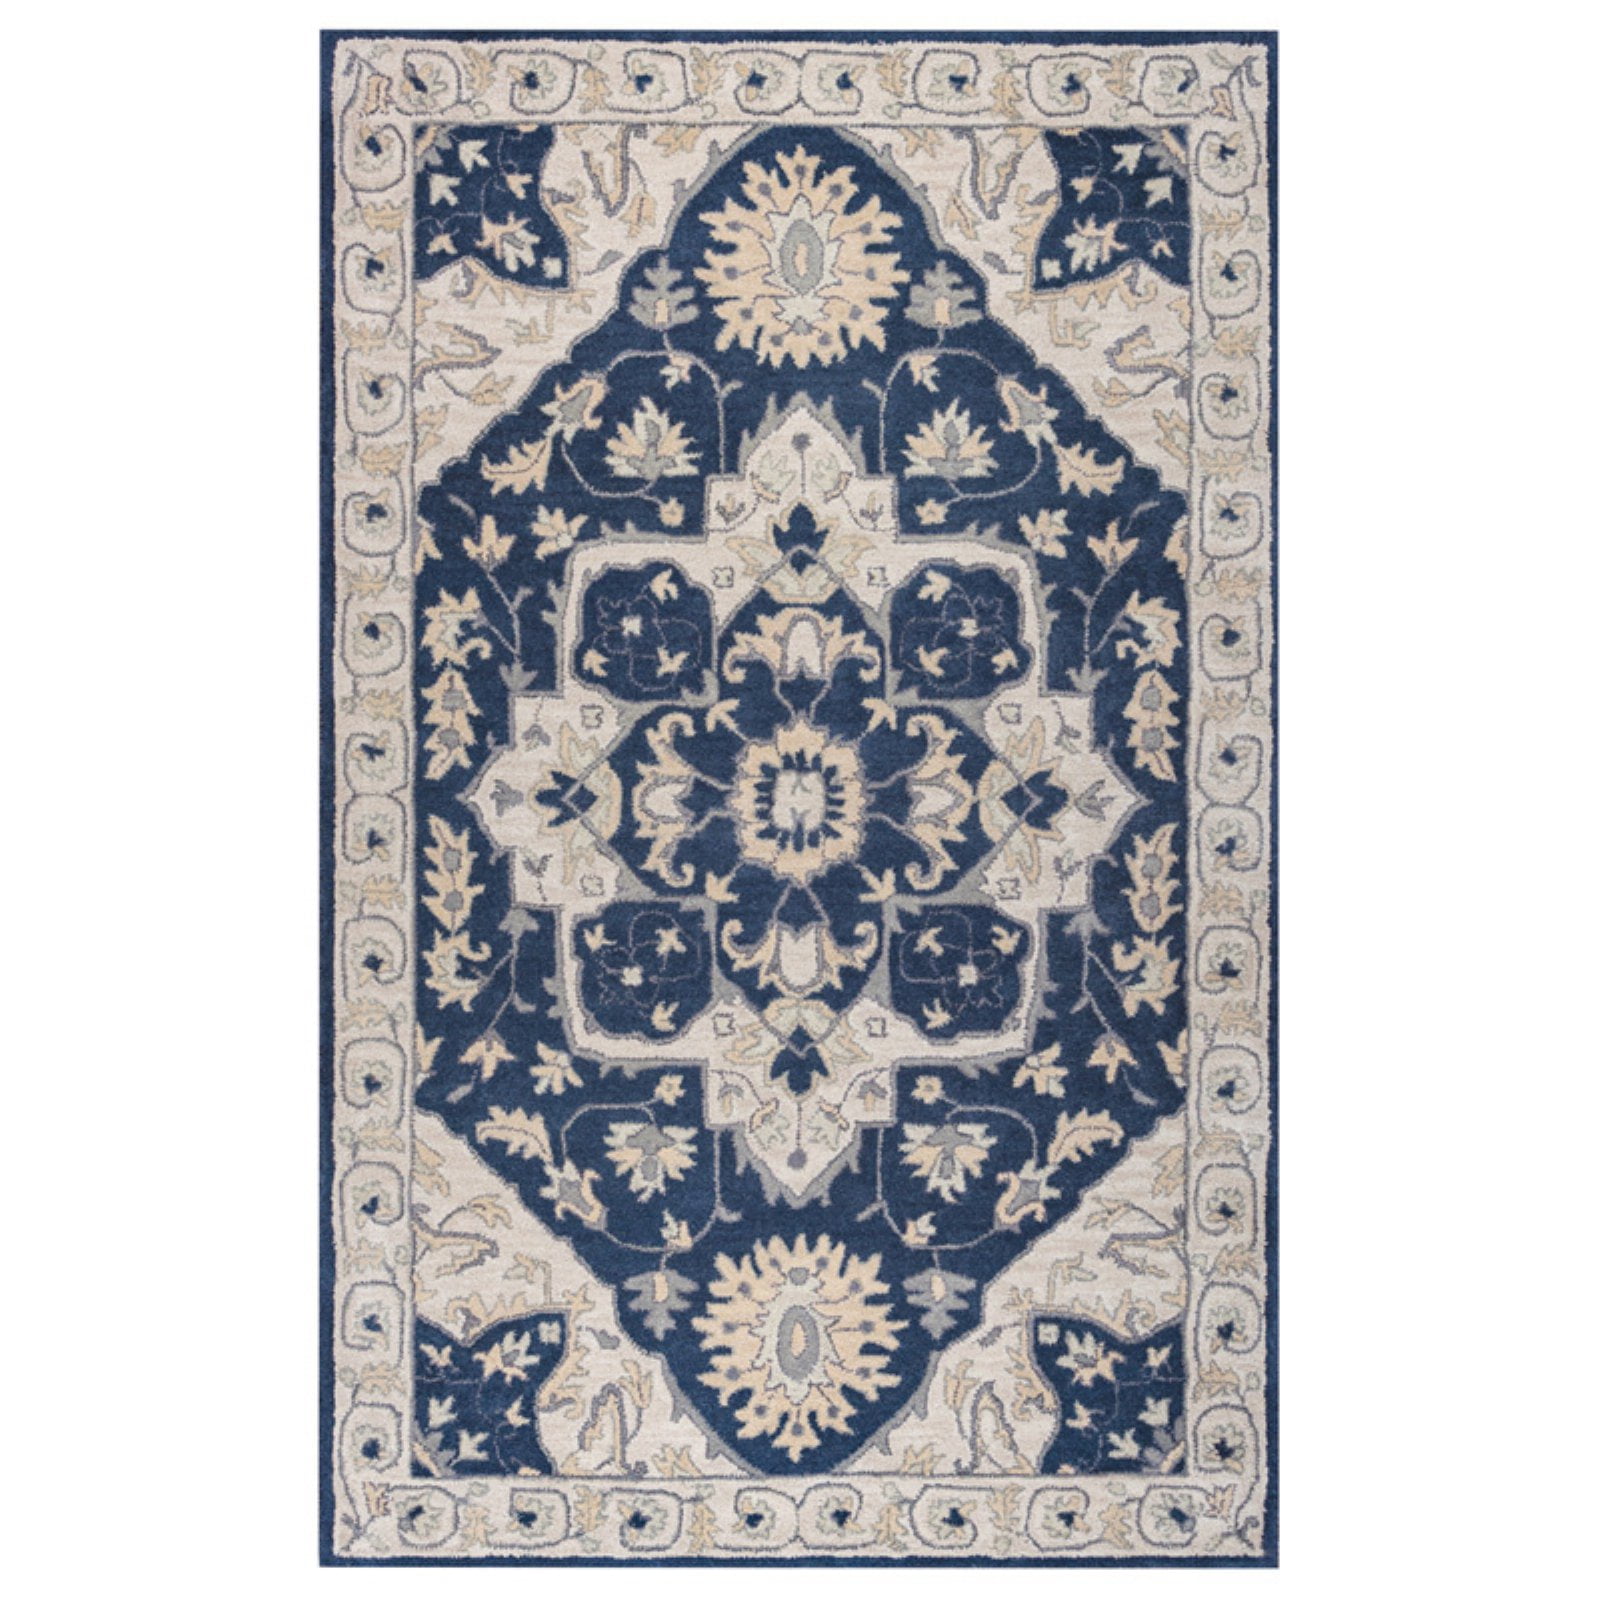 Rizzy Home Valintino Collection Wool Area Rug Blue/Light Gray Trellis 8' x 10'